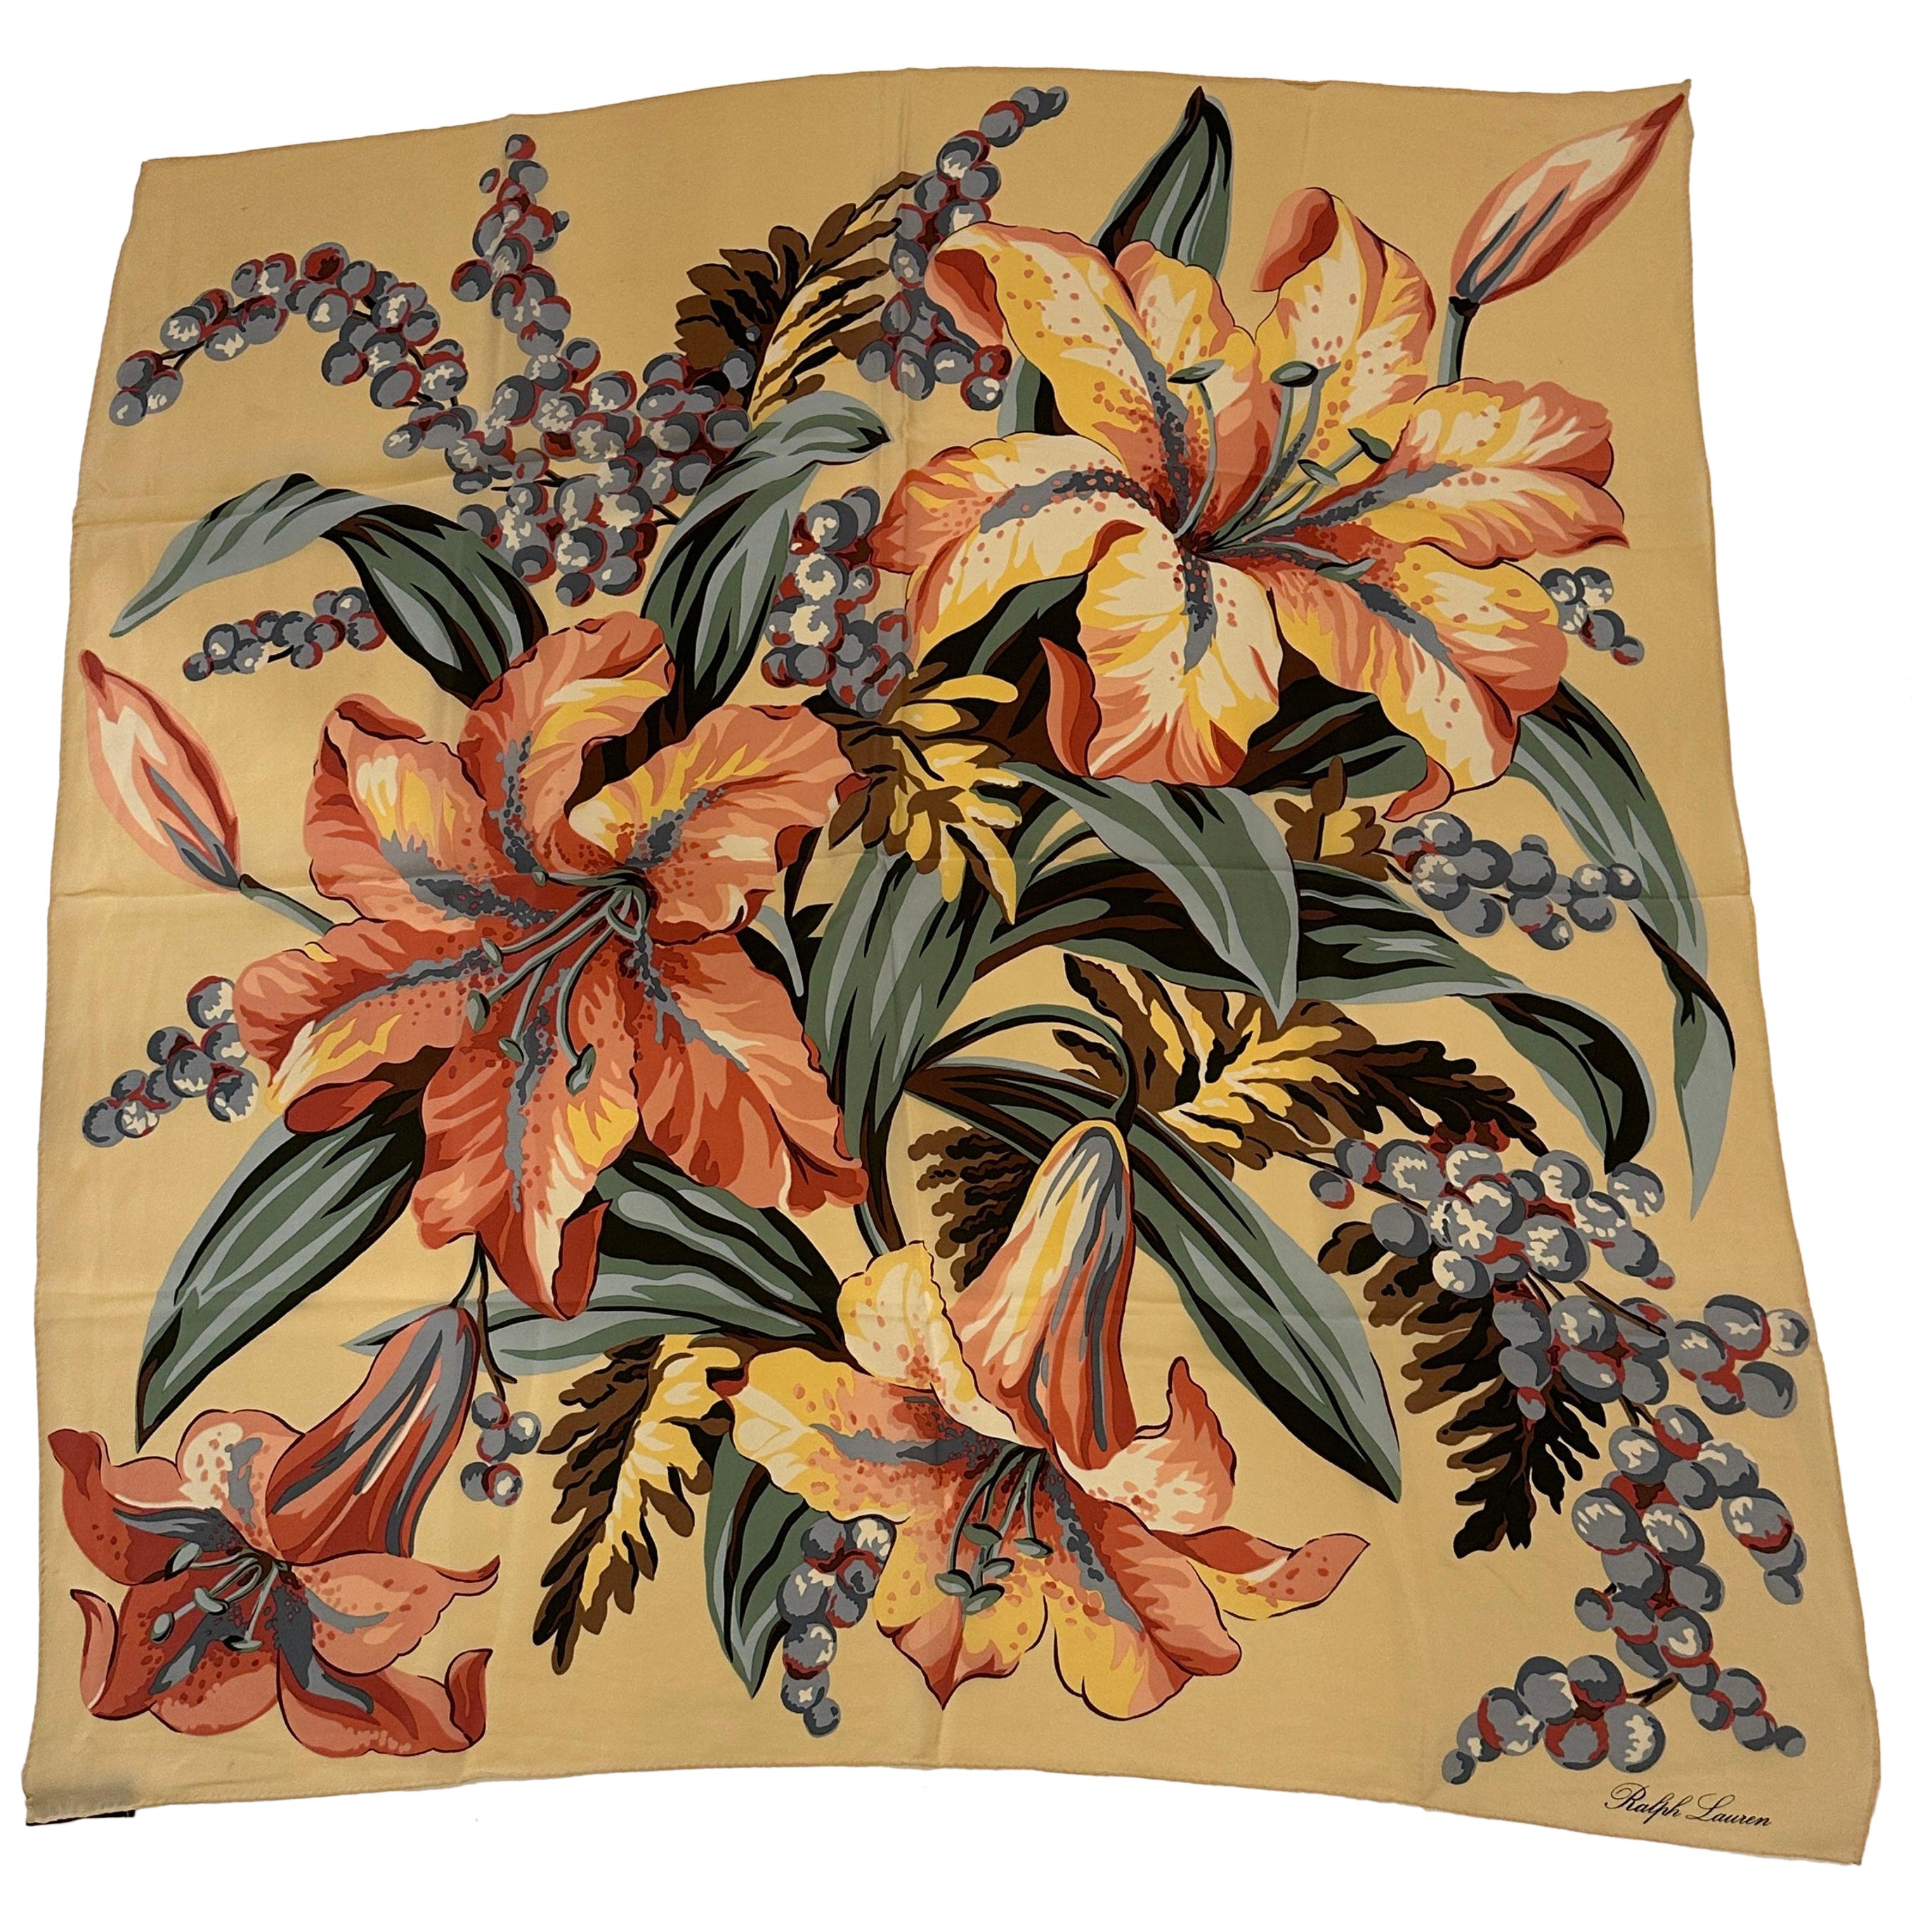 Ralph Lauren Beautiful "Blooming Orchids Bouquet" With Cream Borders Silk Scarf For Sale